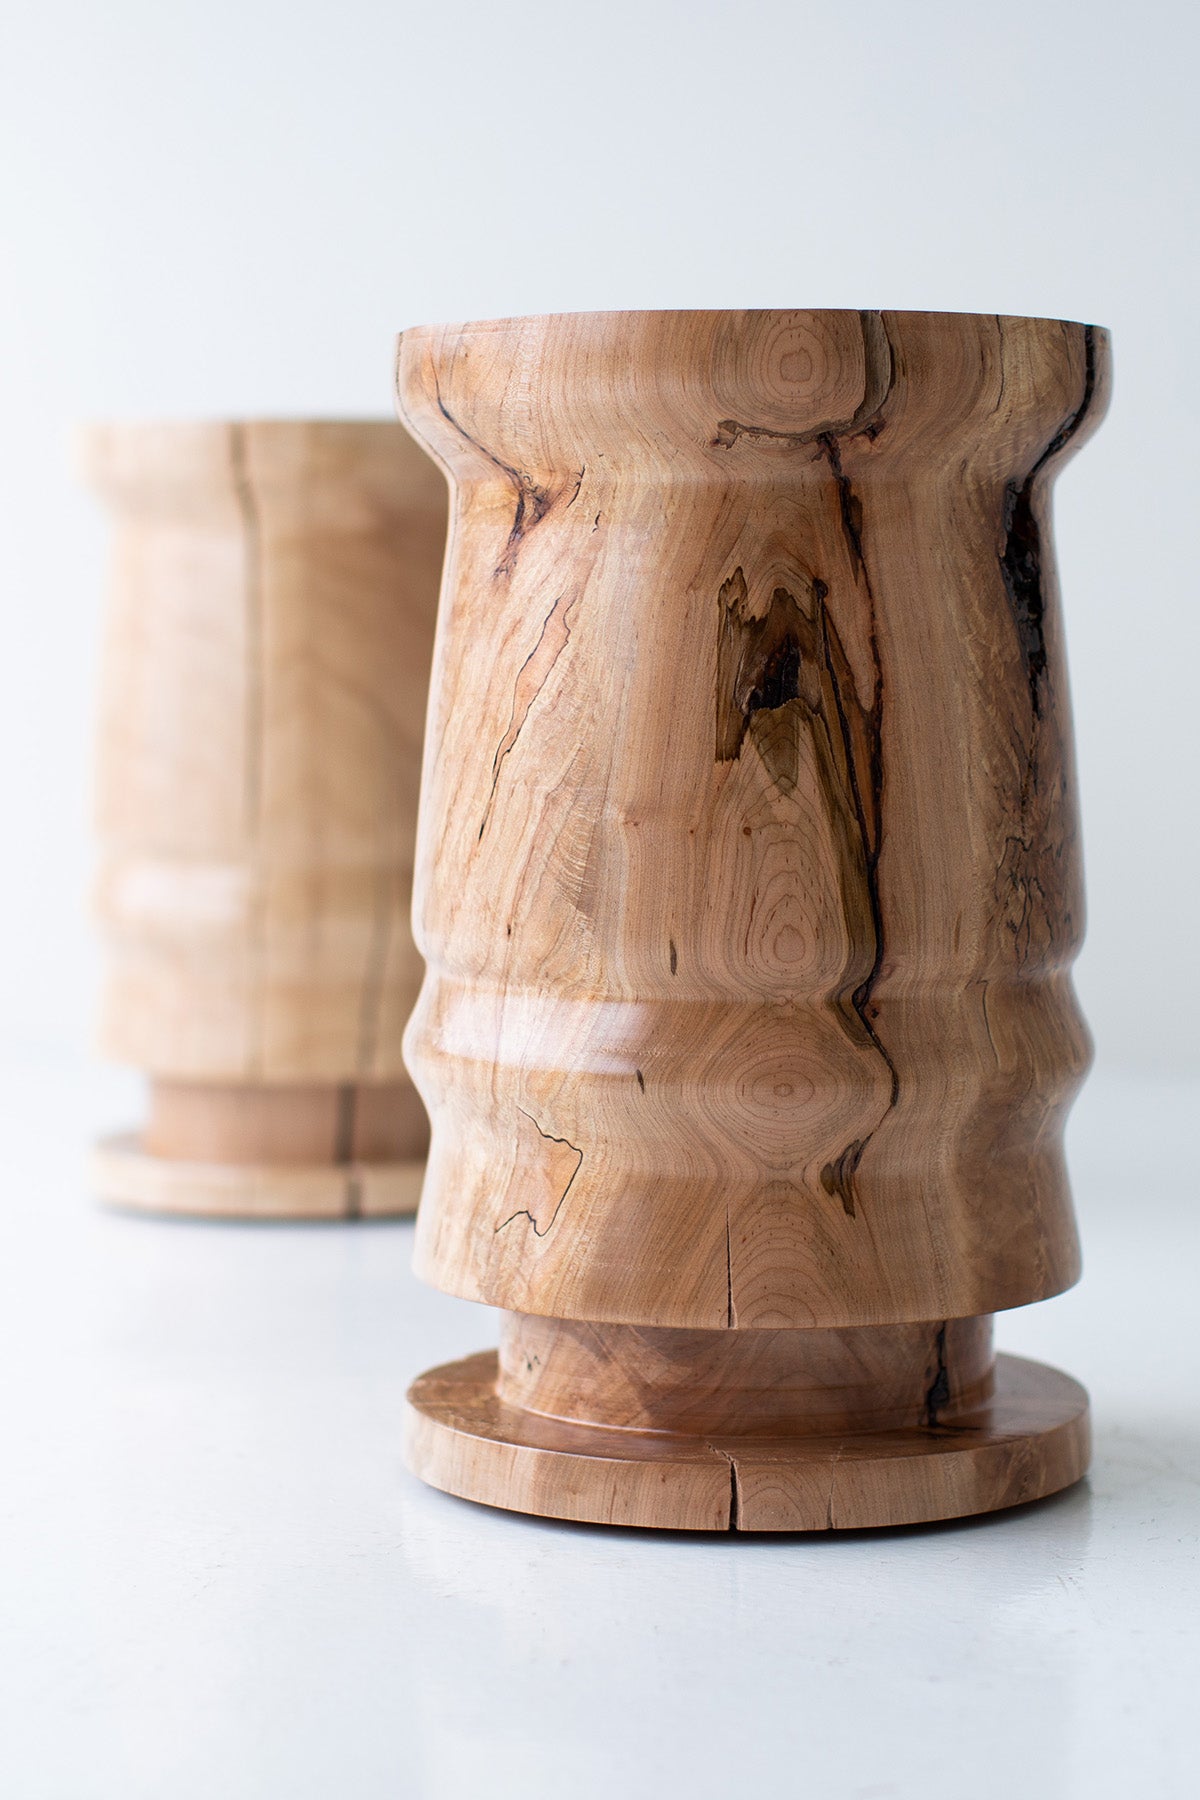 scultped and specialty stumps